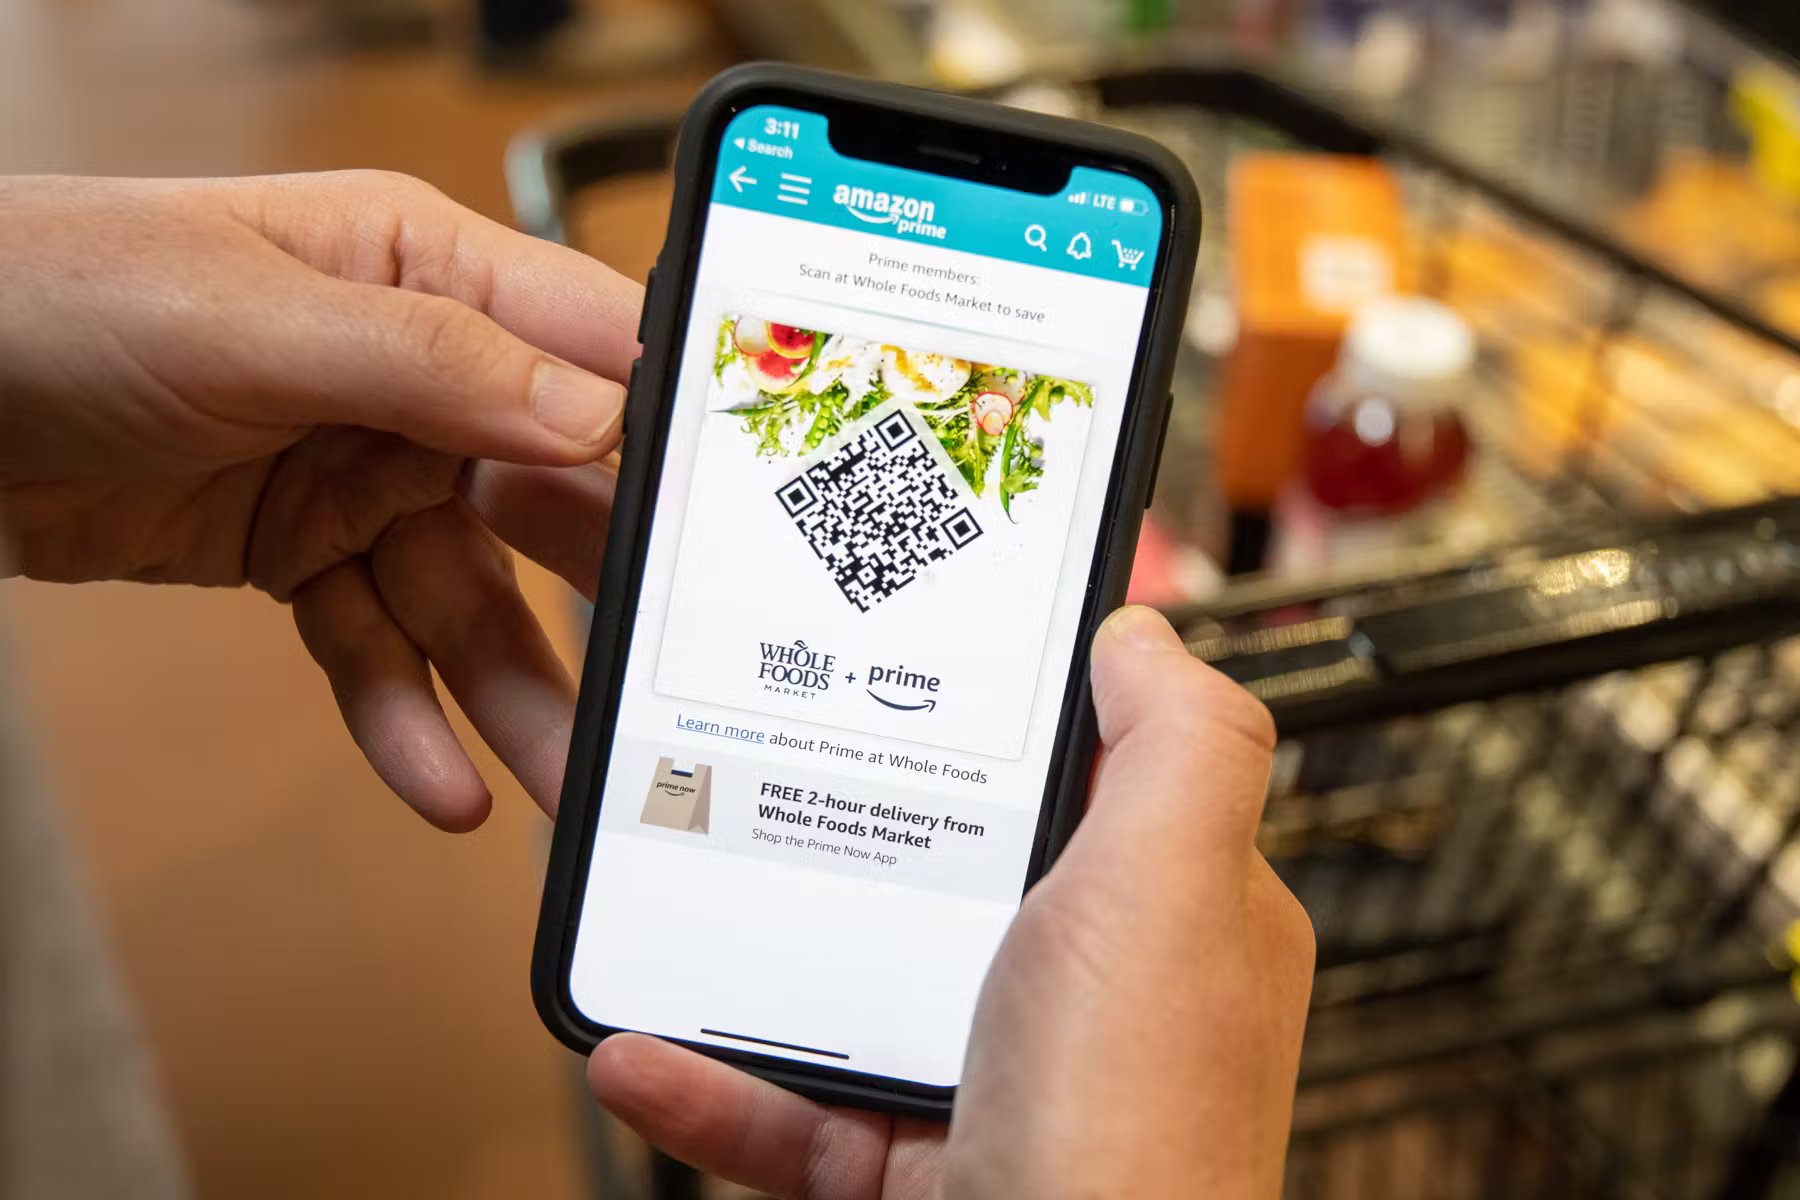 How To Use Amazon Prime At Whole Foods Without App